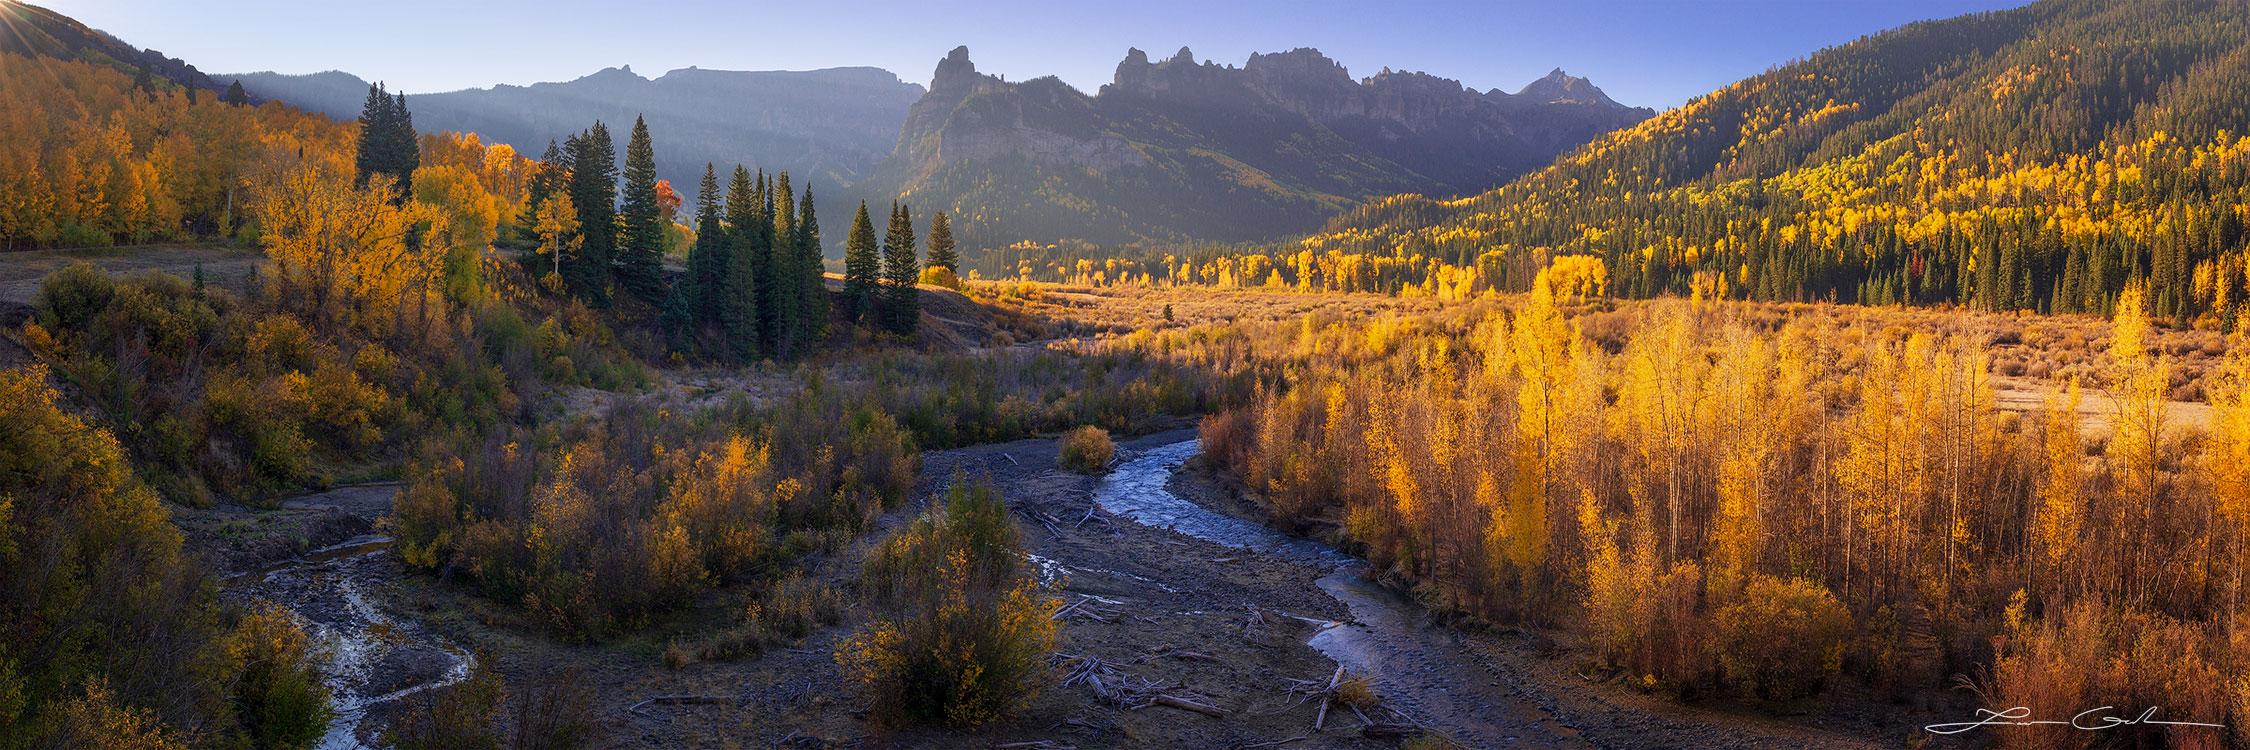 A mountain valley fill with yellow aspen trees and a river - Gintchin Fine Art